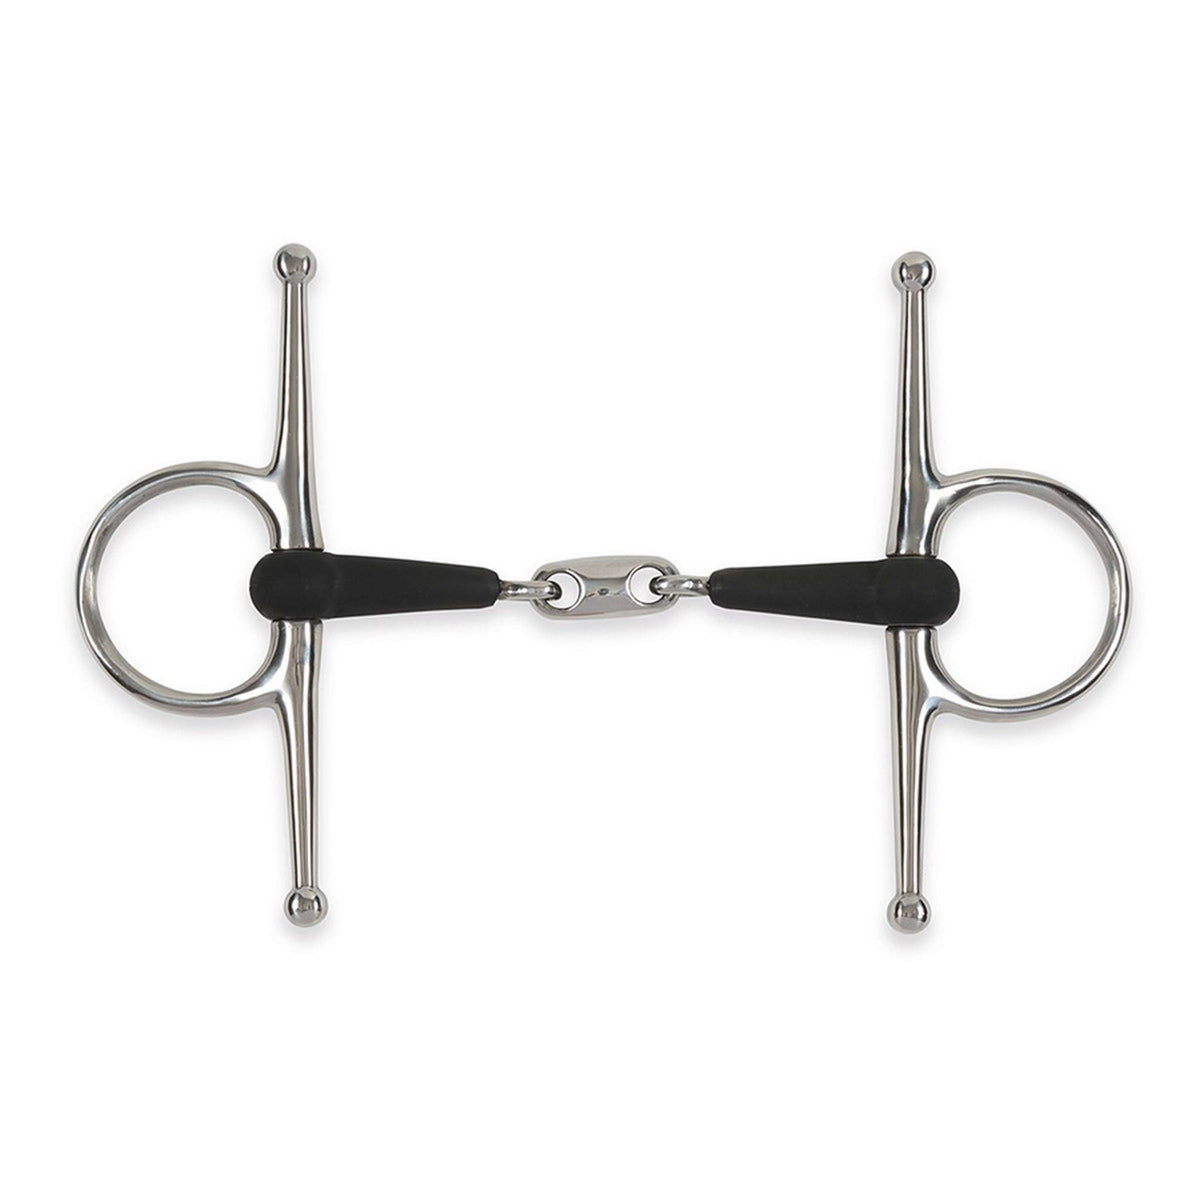 Equirubber by Shires Knebeltrense 15mm Doppelt Gebrochen